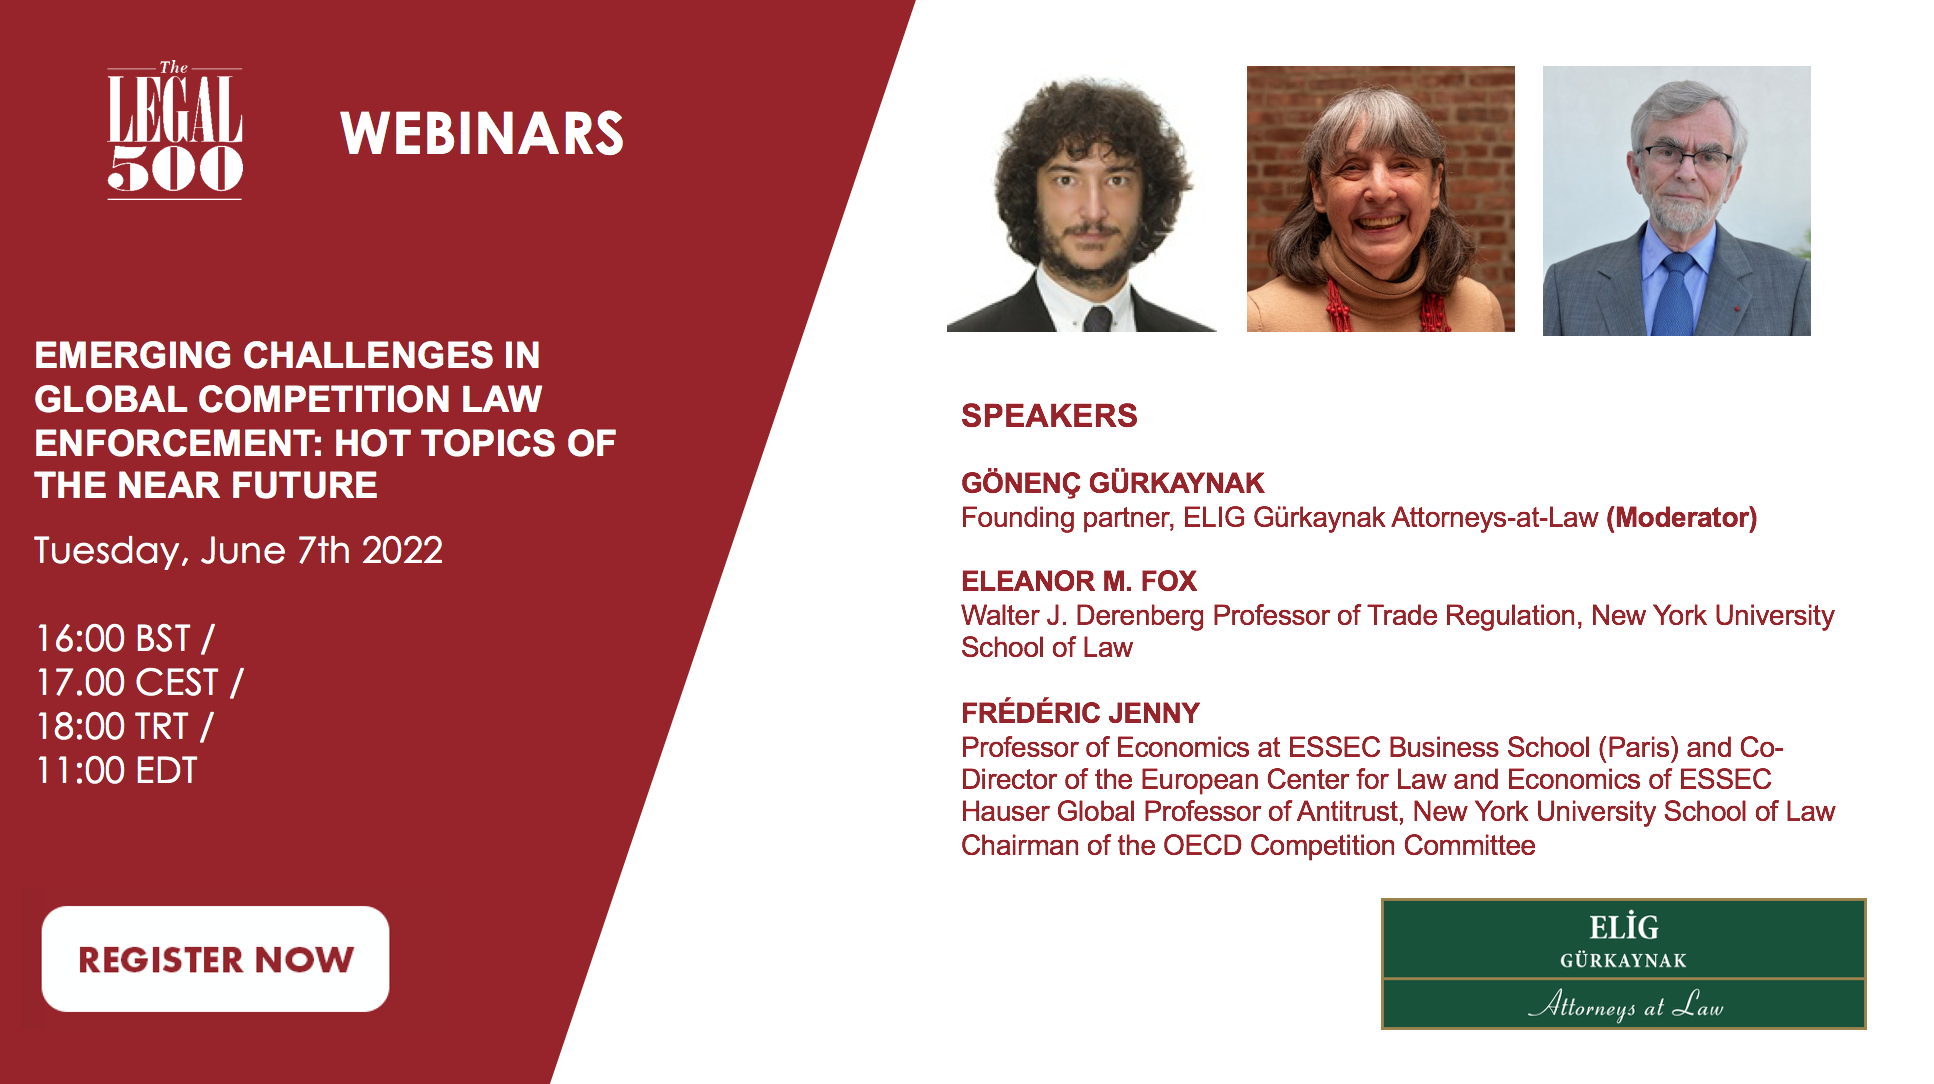 The Legal 500 Webinar “Emerging Challenges in Global Competition Law Enforcement: Hot Topics of the Near Future”